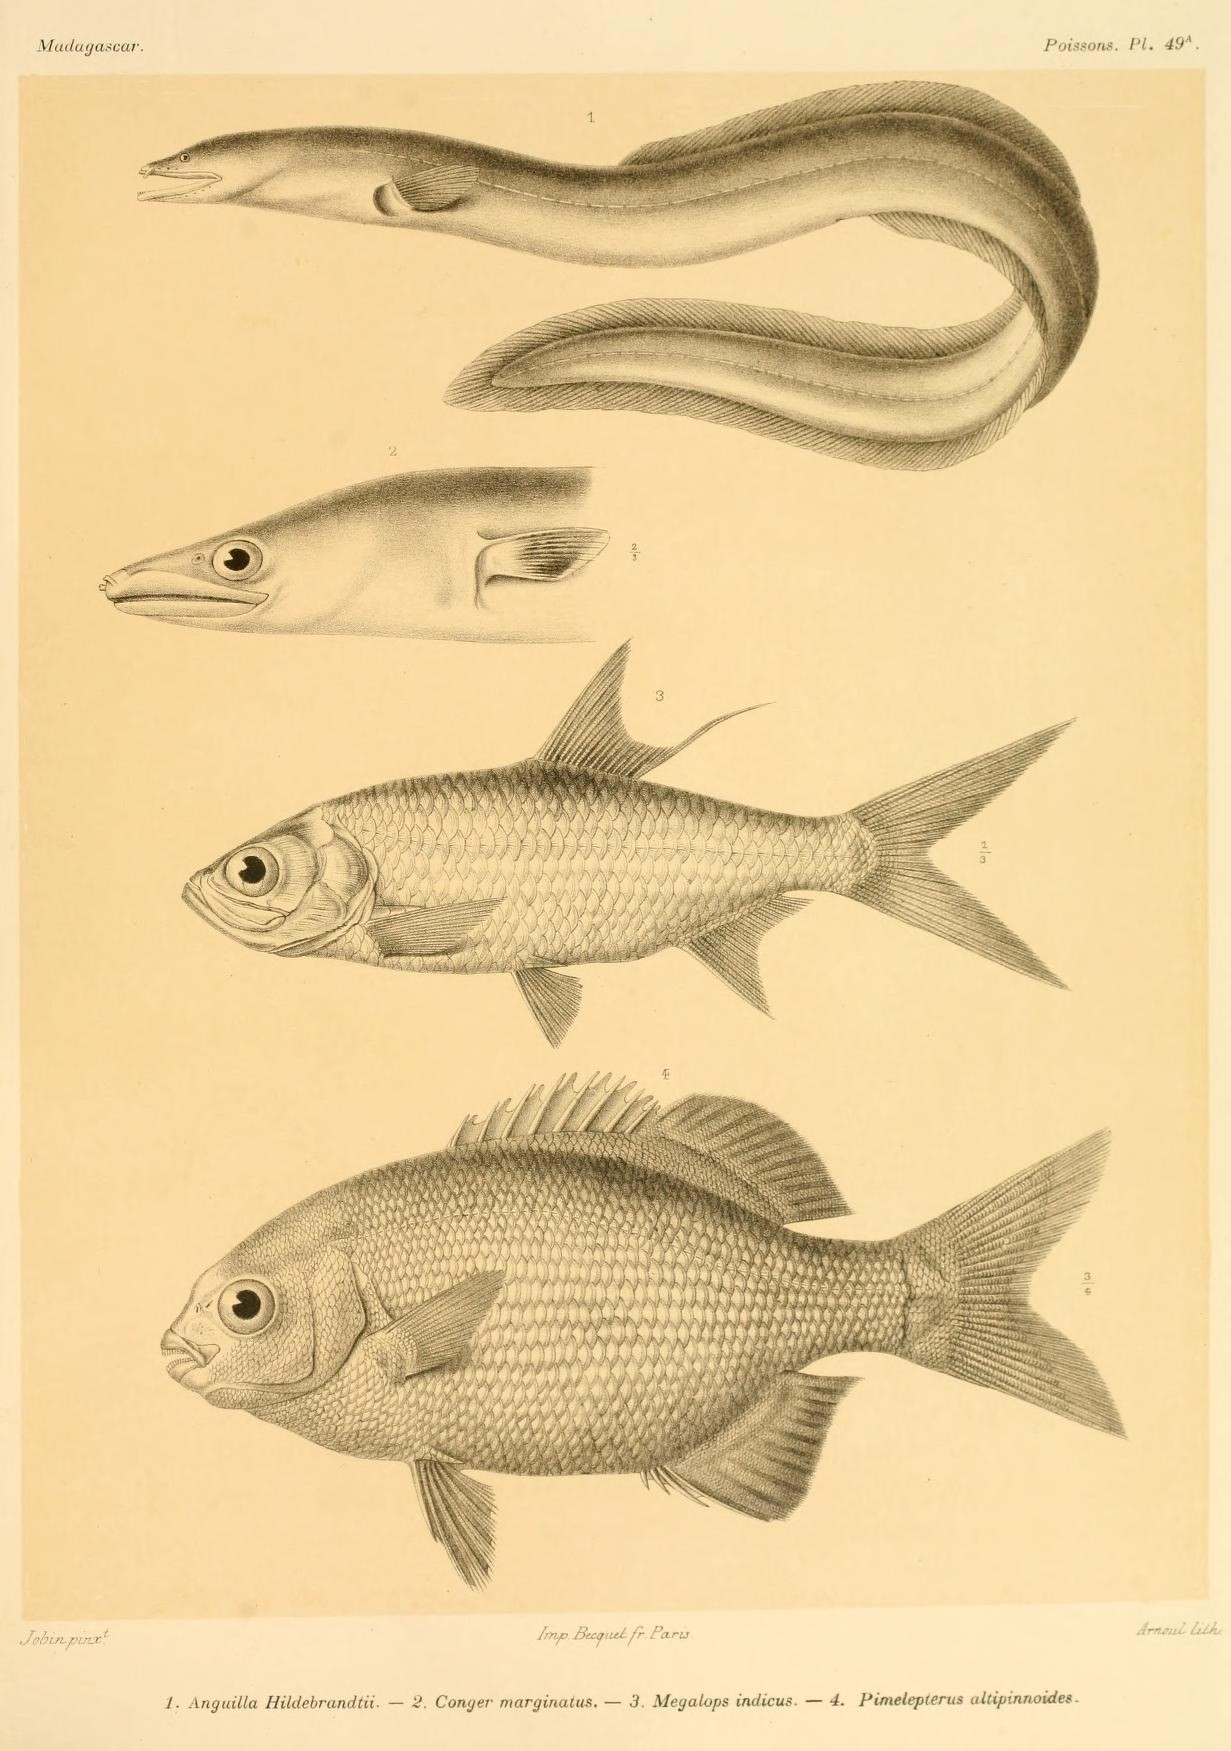 three fish with long tailes are seen in this print